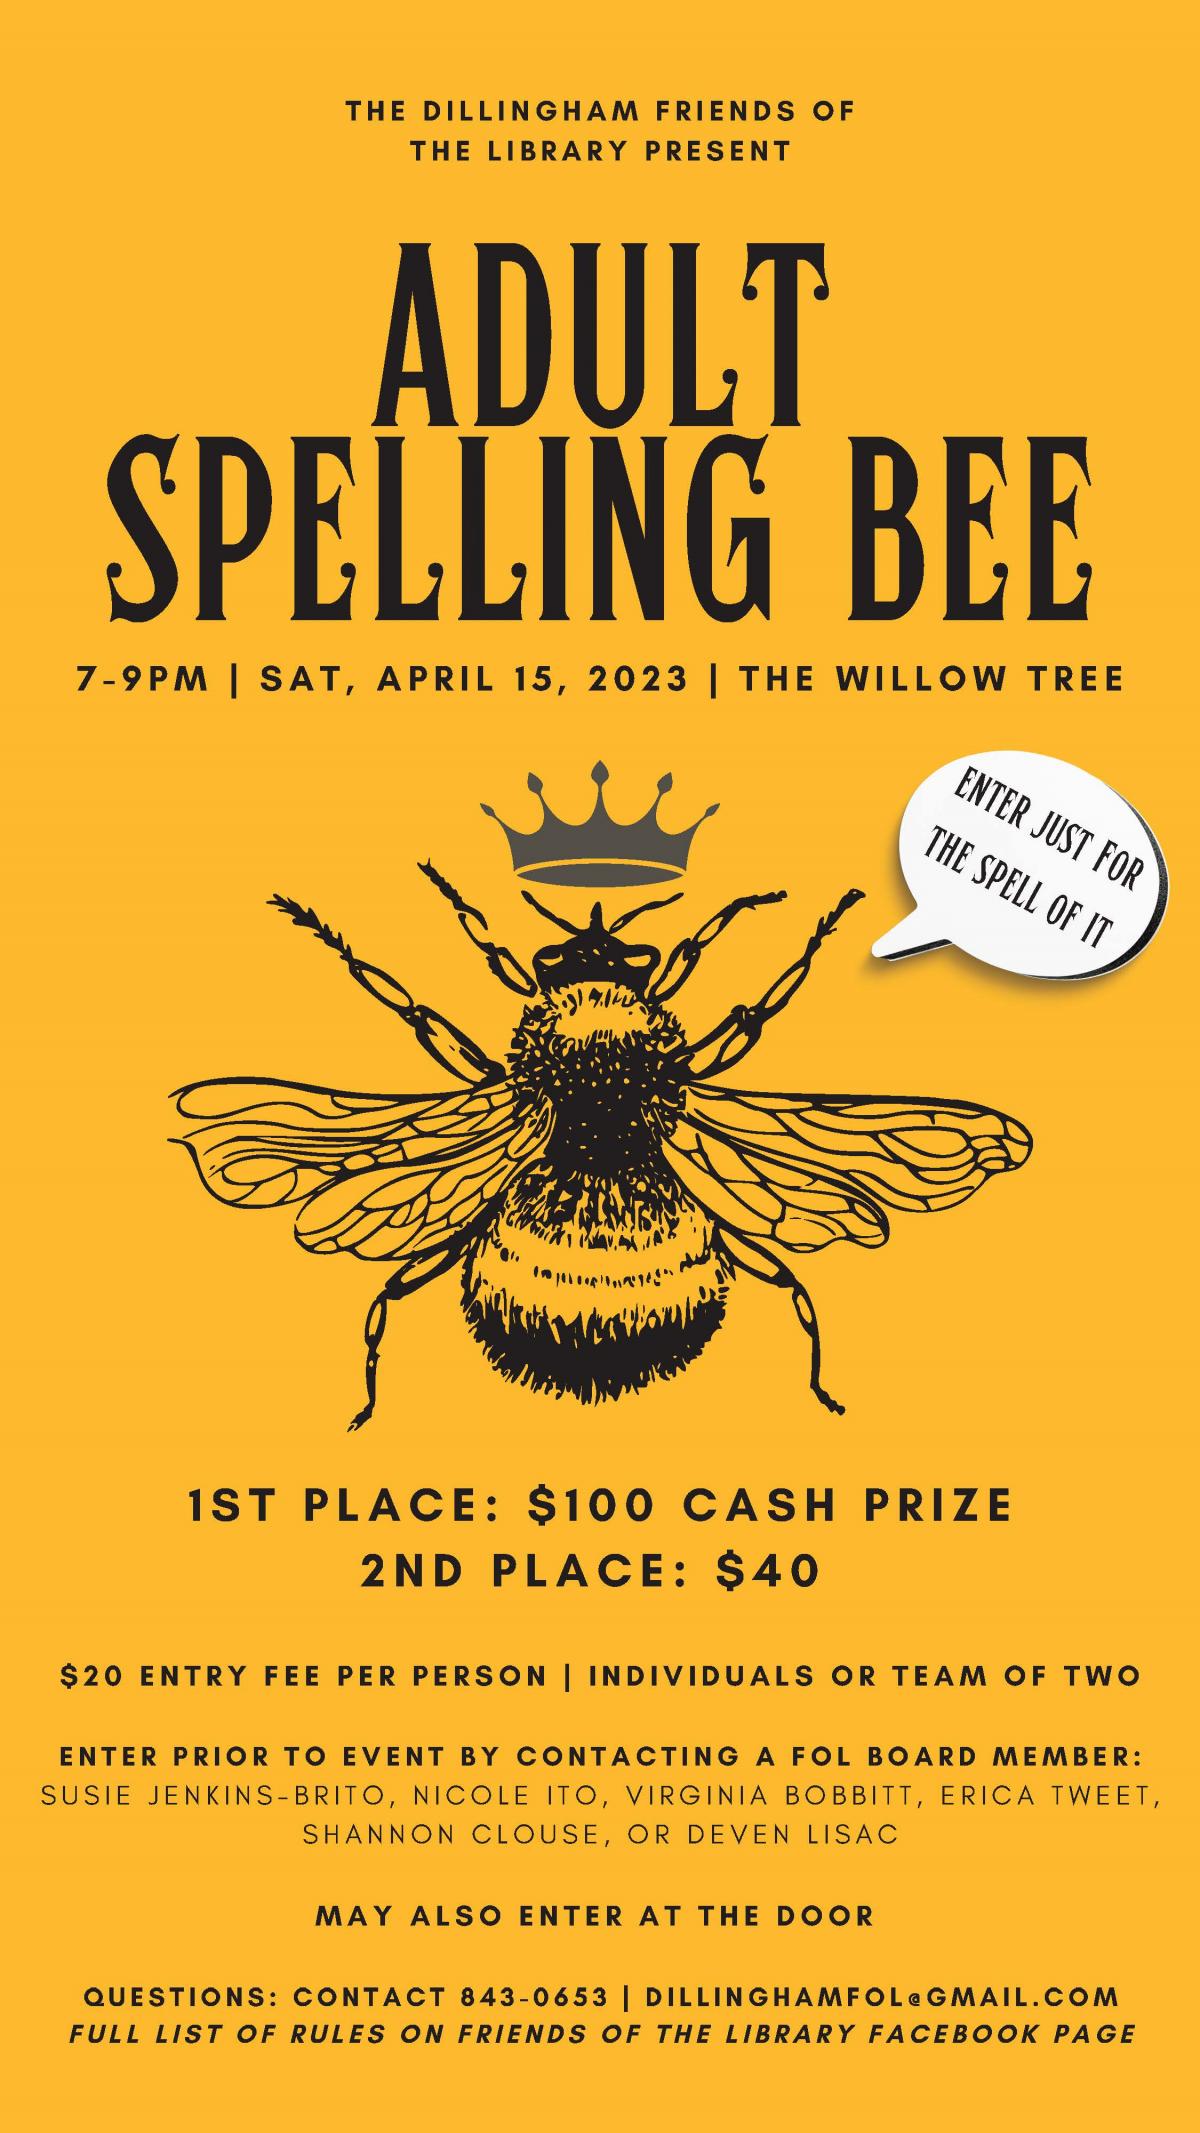 Adult Spelling Bee - The Willow Tree 4/15/23, 7 - 9 pm